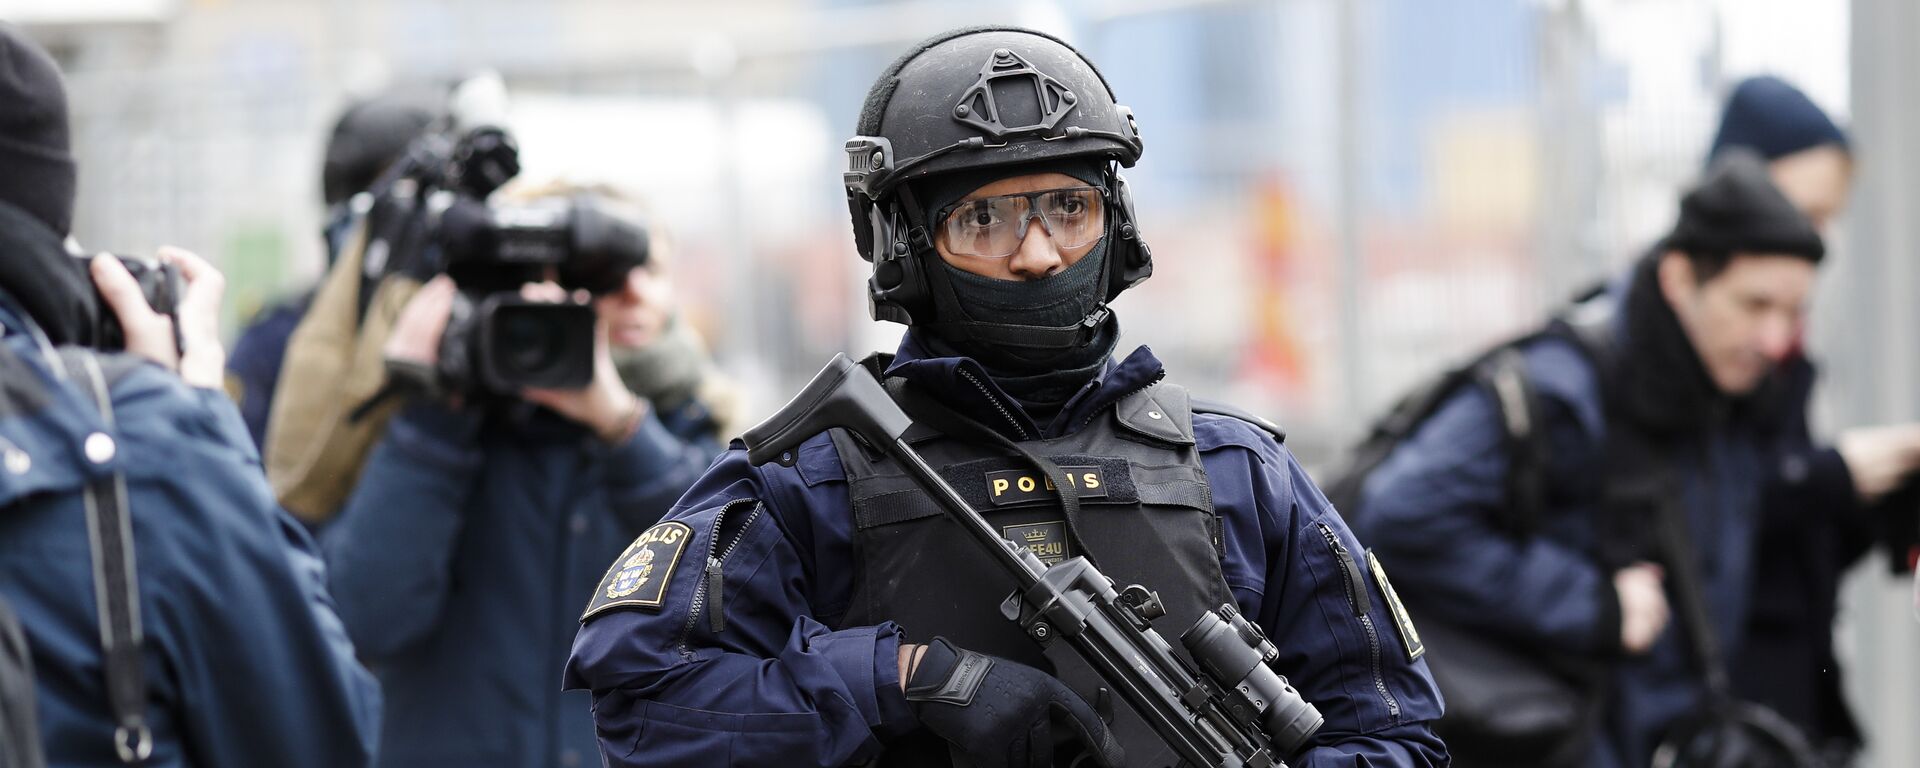 A special force police officer patrols near the department store Ahlens following a suspected terror attack on the Drottninggatan street in central Stockholm, Sweden, Saturday, April 8, 2017 - Sputnik International, 1920, 26.05.2022